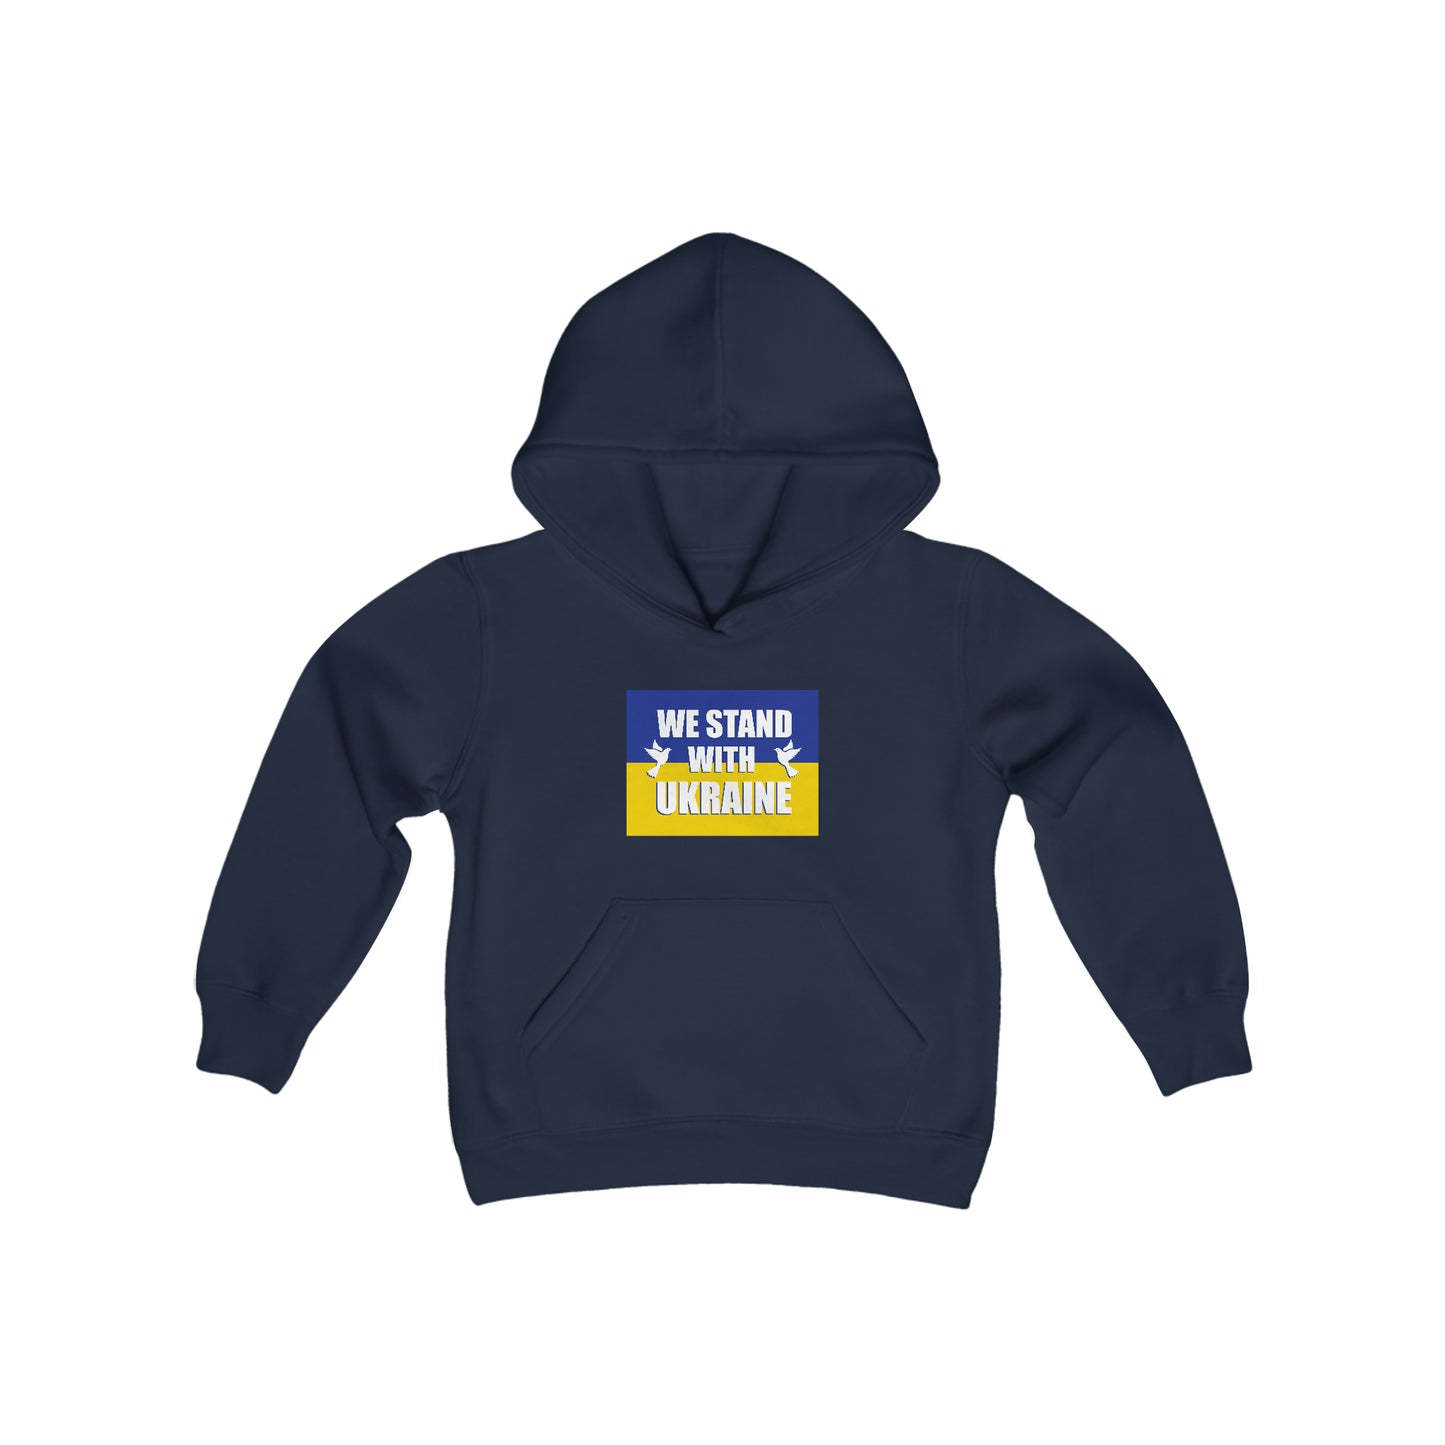 “We Stand With Ukraine” Youth Hoodie